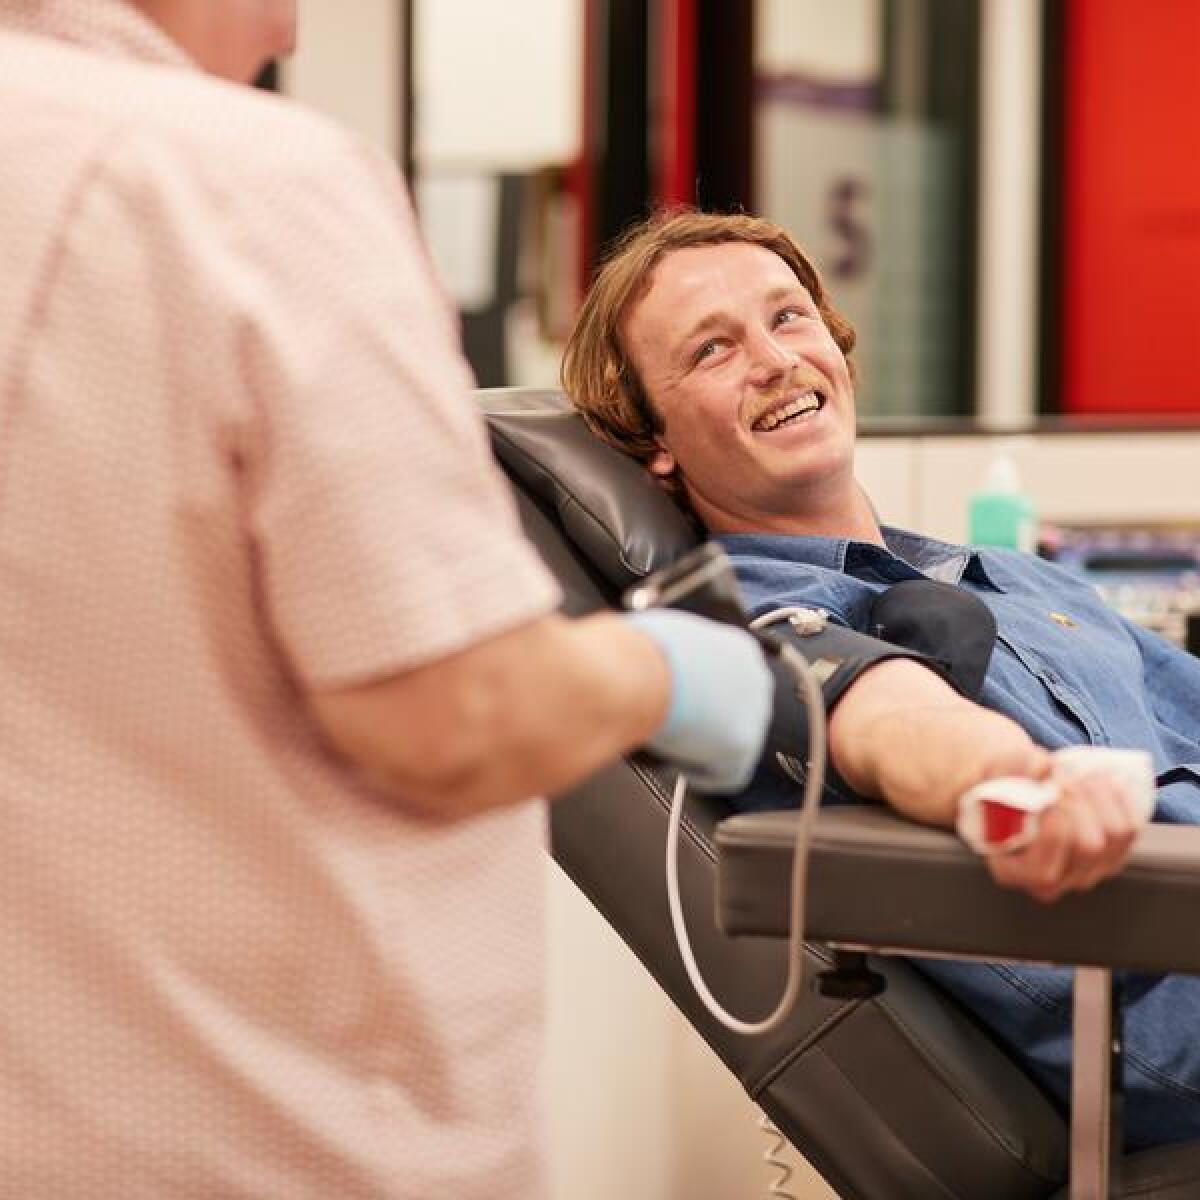 A blood donor